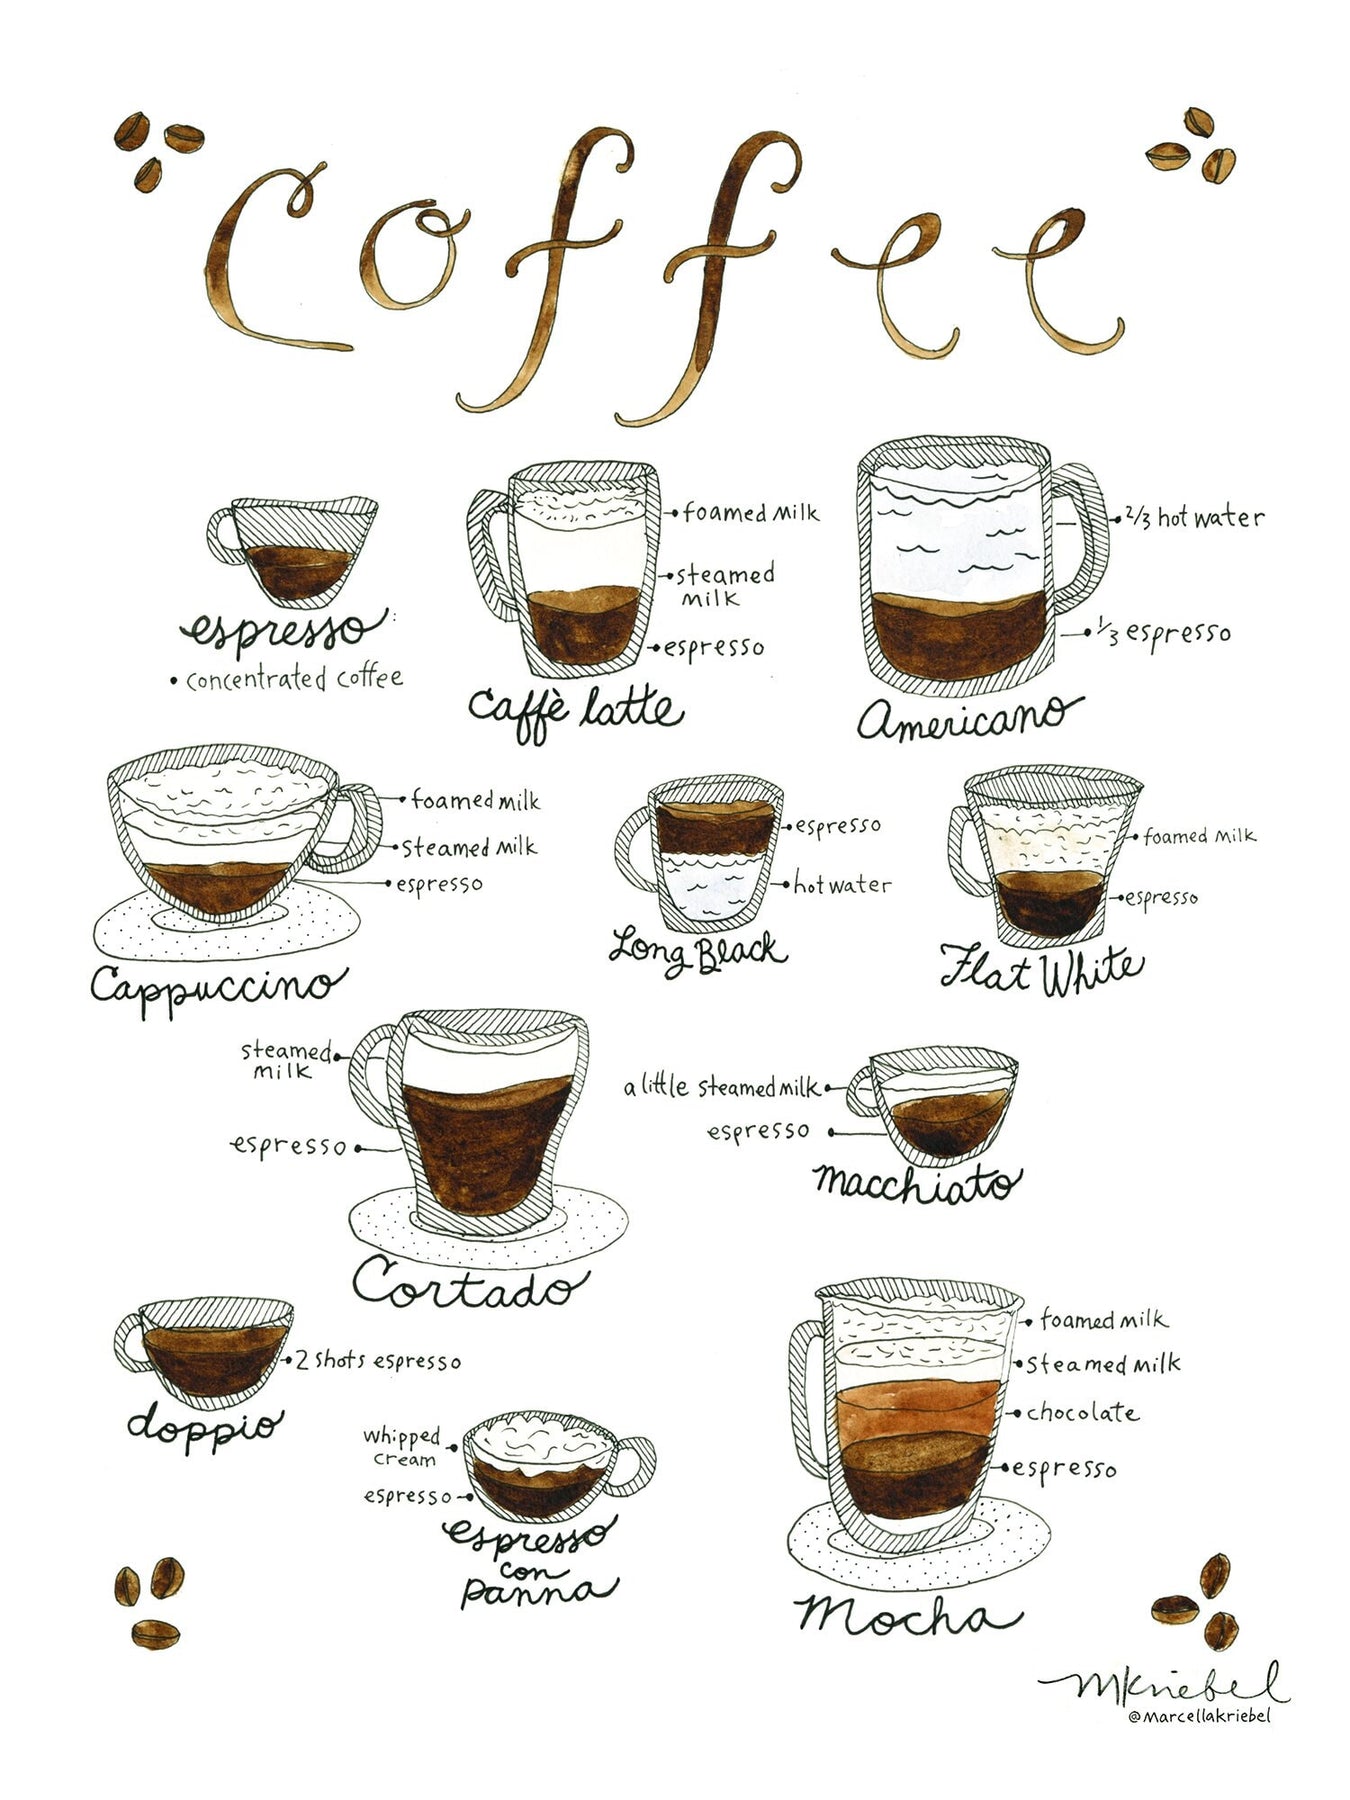 milk-brother  Coffee infographic, Coffee equipment, Coffee ingredients